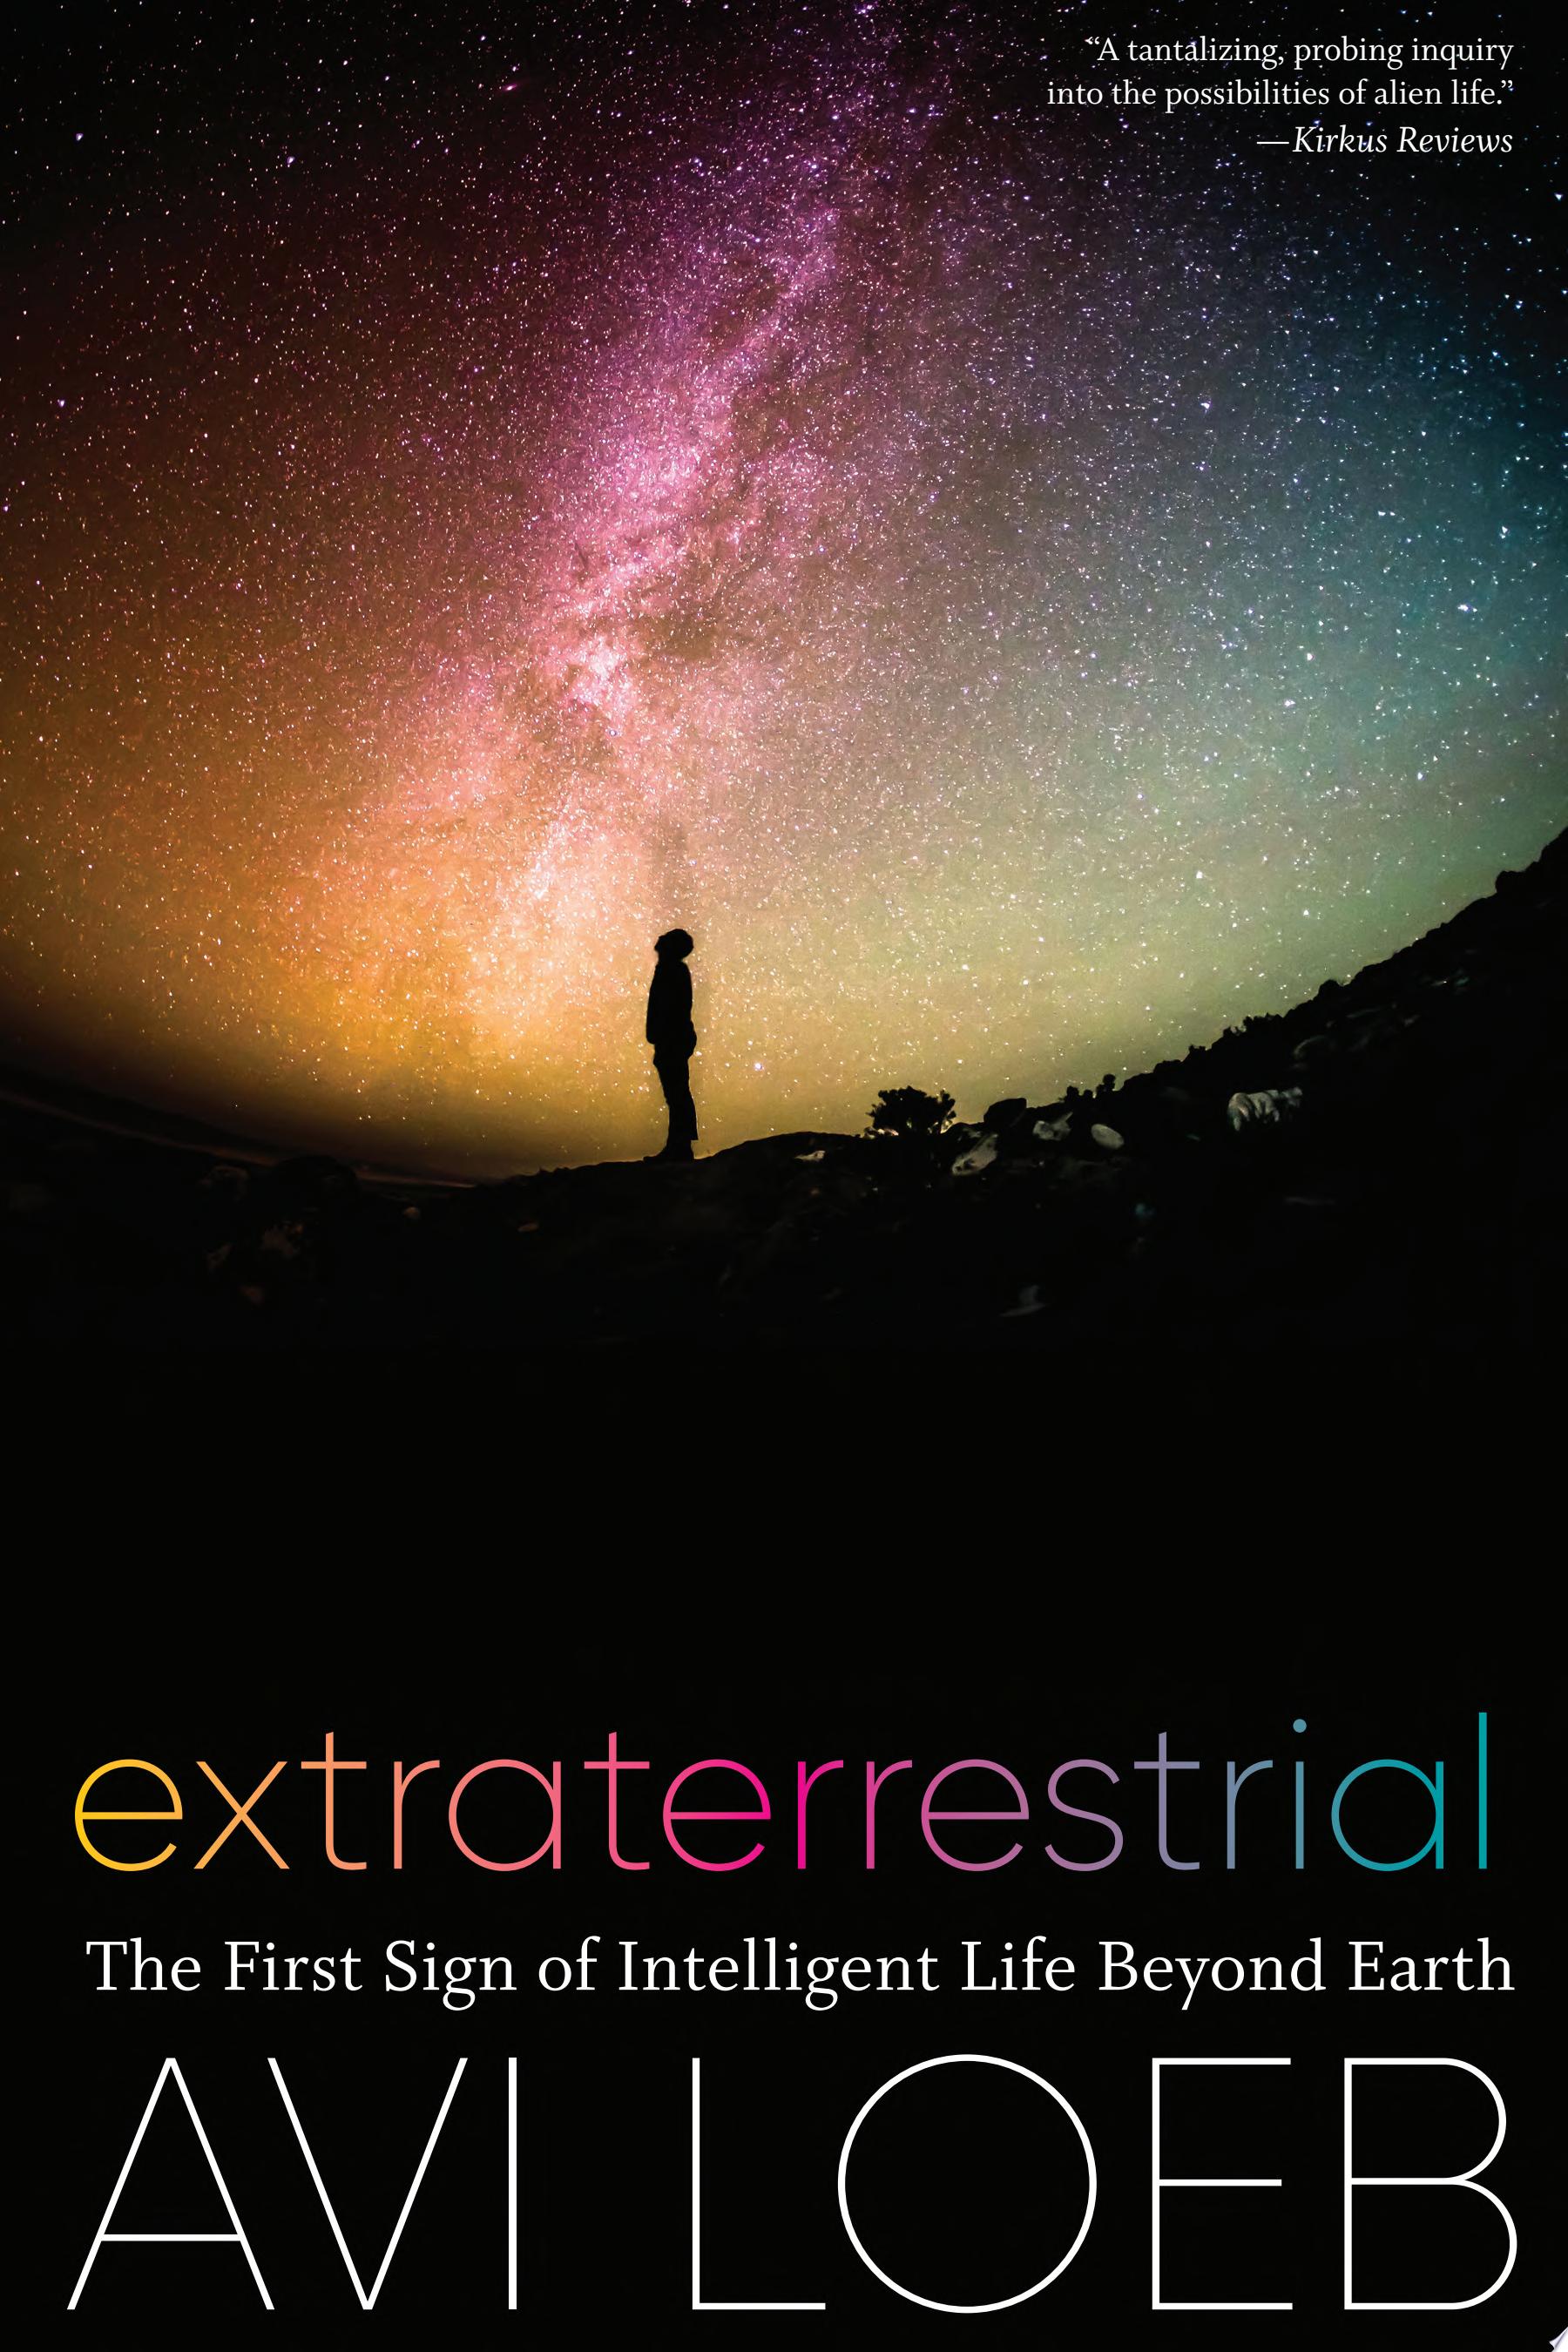 Image for "Extraterrestrial"